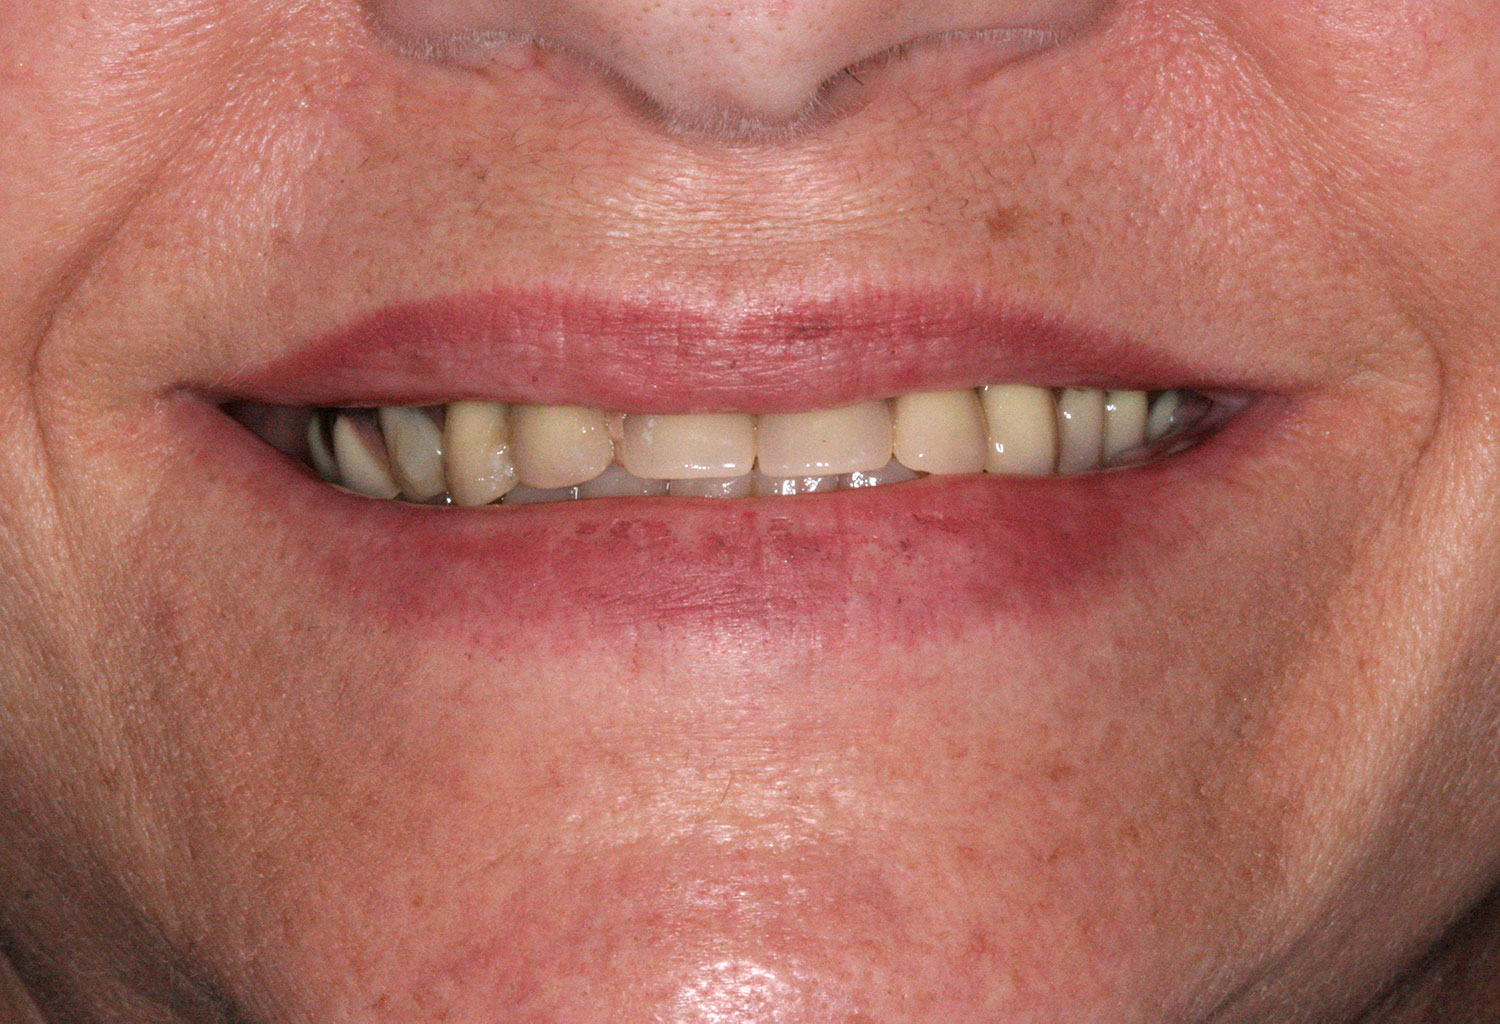 Before re-restoration of implants and teeth